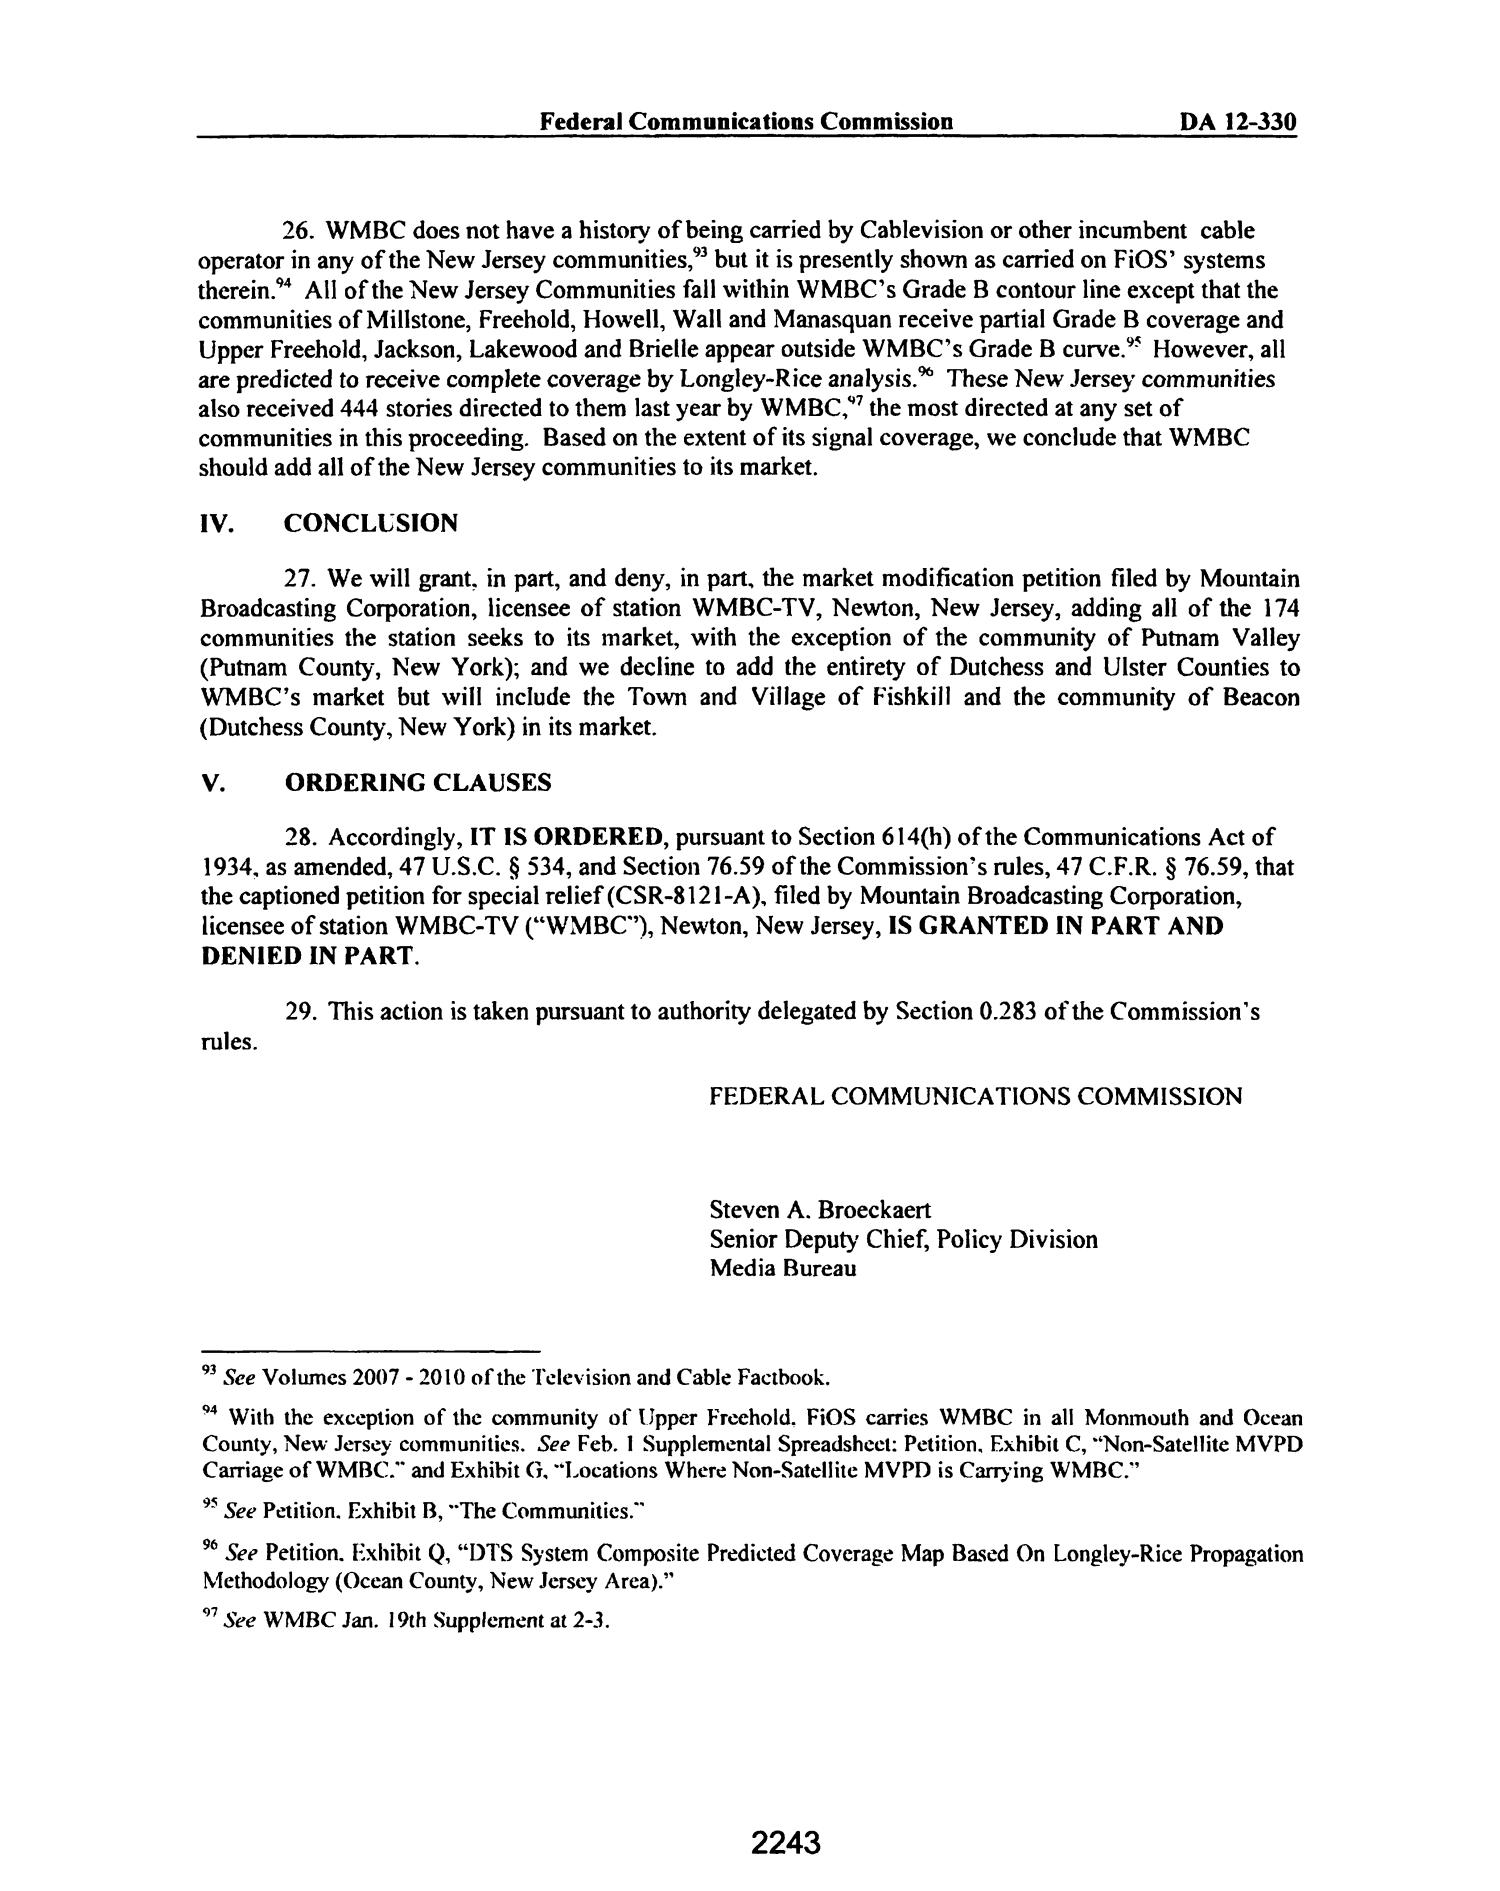 FCC Record, Volume 27, No. 3, Pages 1878 to 2785, February 21 - March 16, 2012
                                                
                                                    2243
                                                